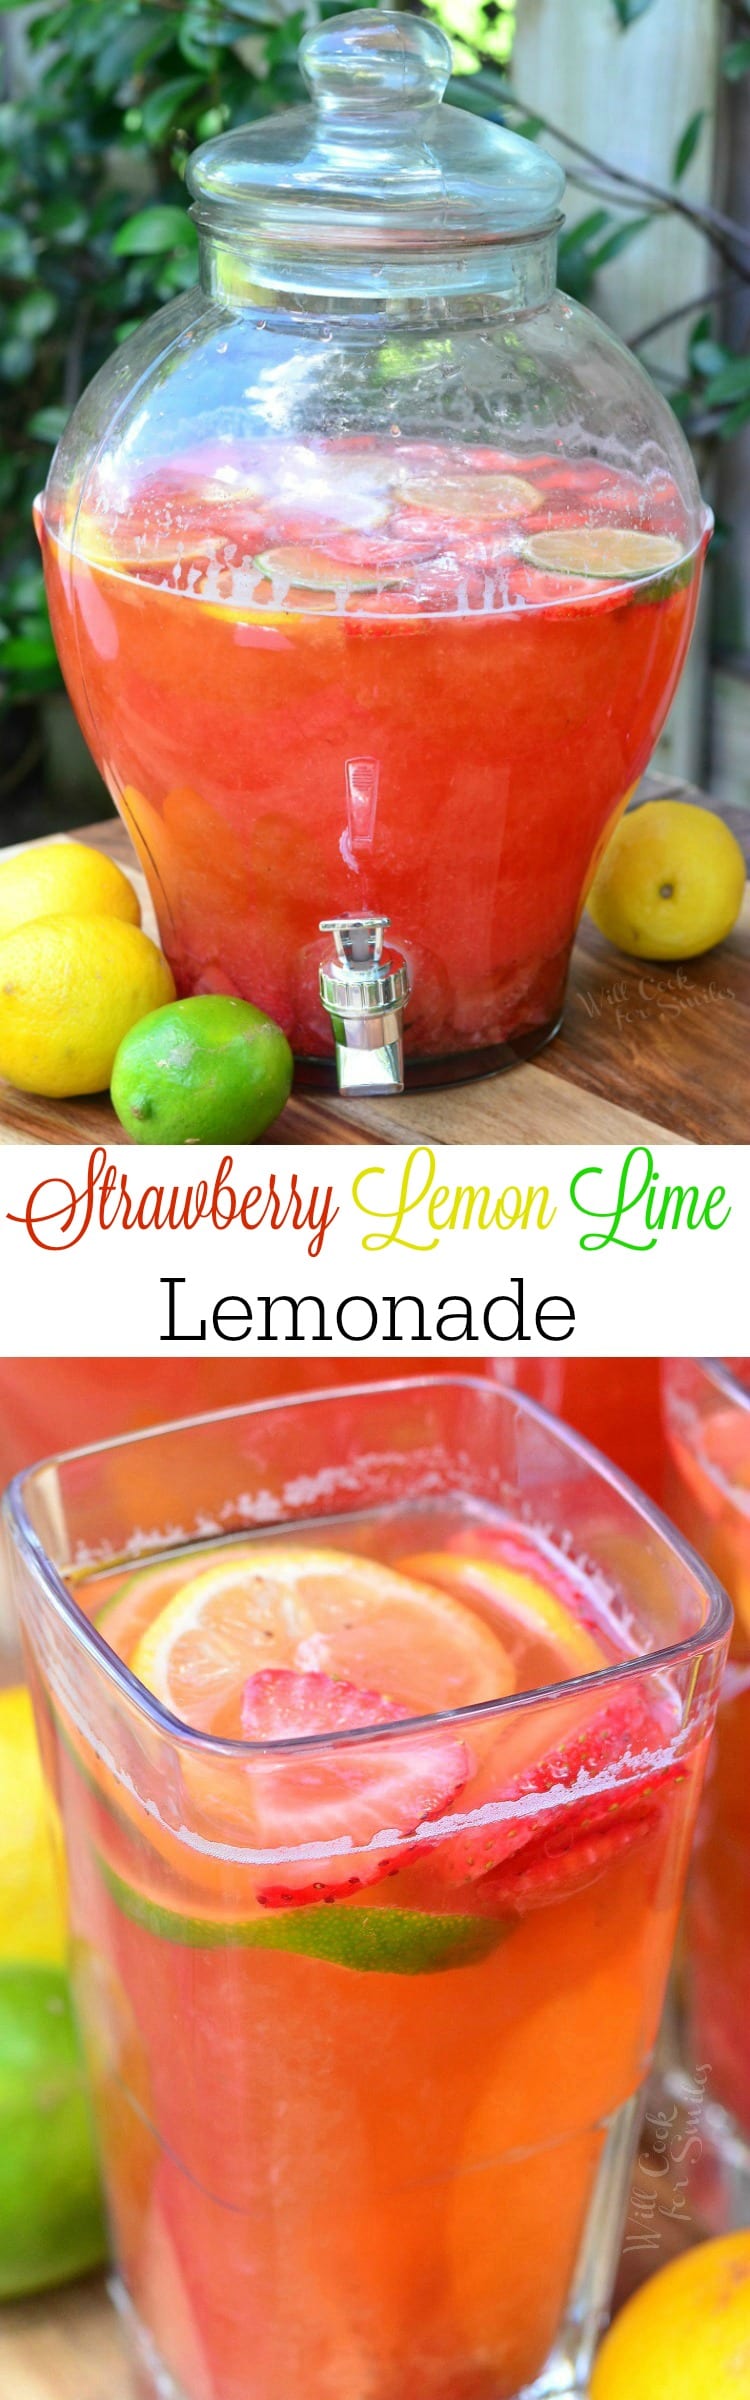 Strawberry Lemon Lime Lemonade in a clear glass with slices lemons, limes, and strawberries in it as garnish on a cutting board with lemons and lime around it collage